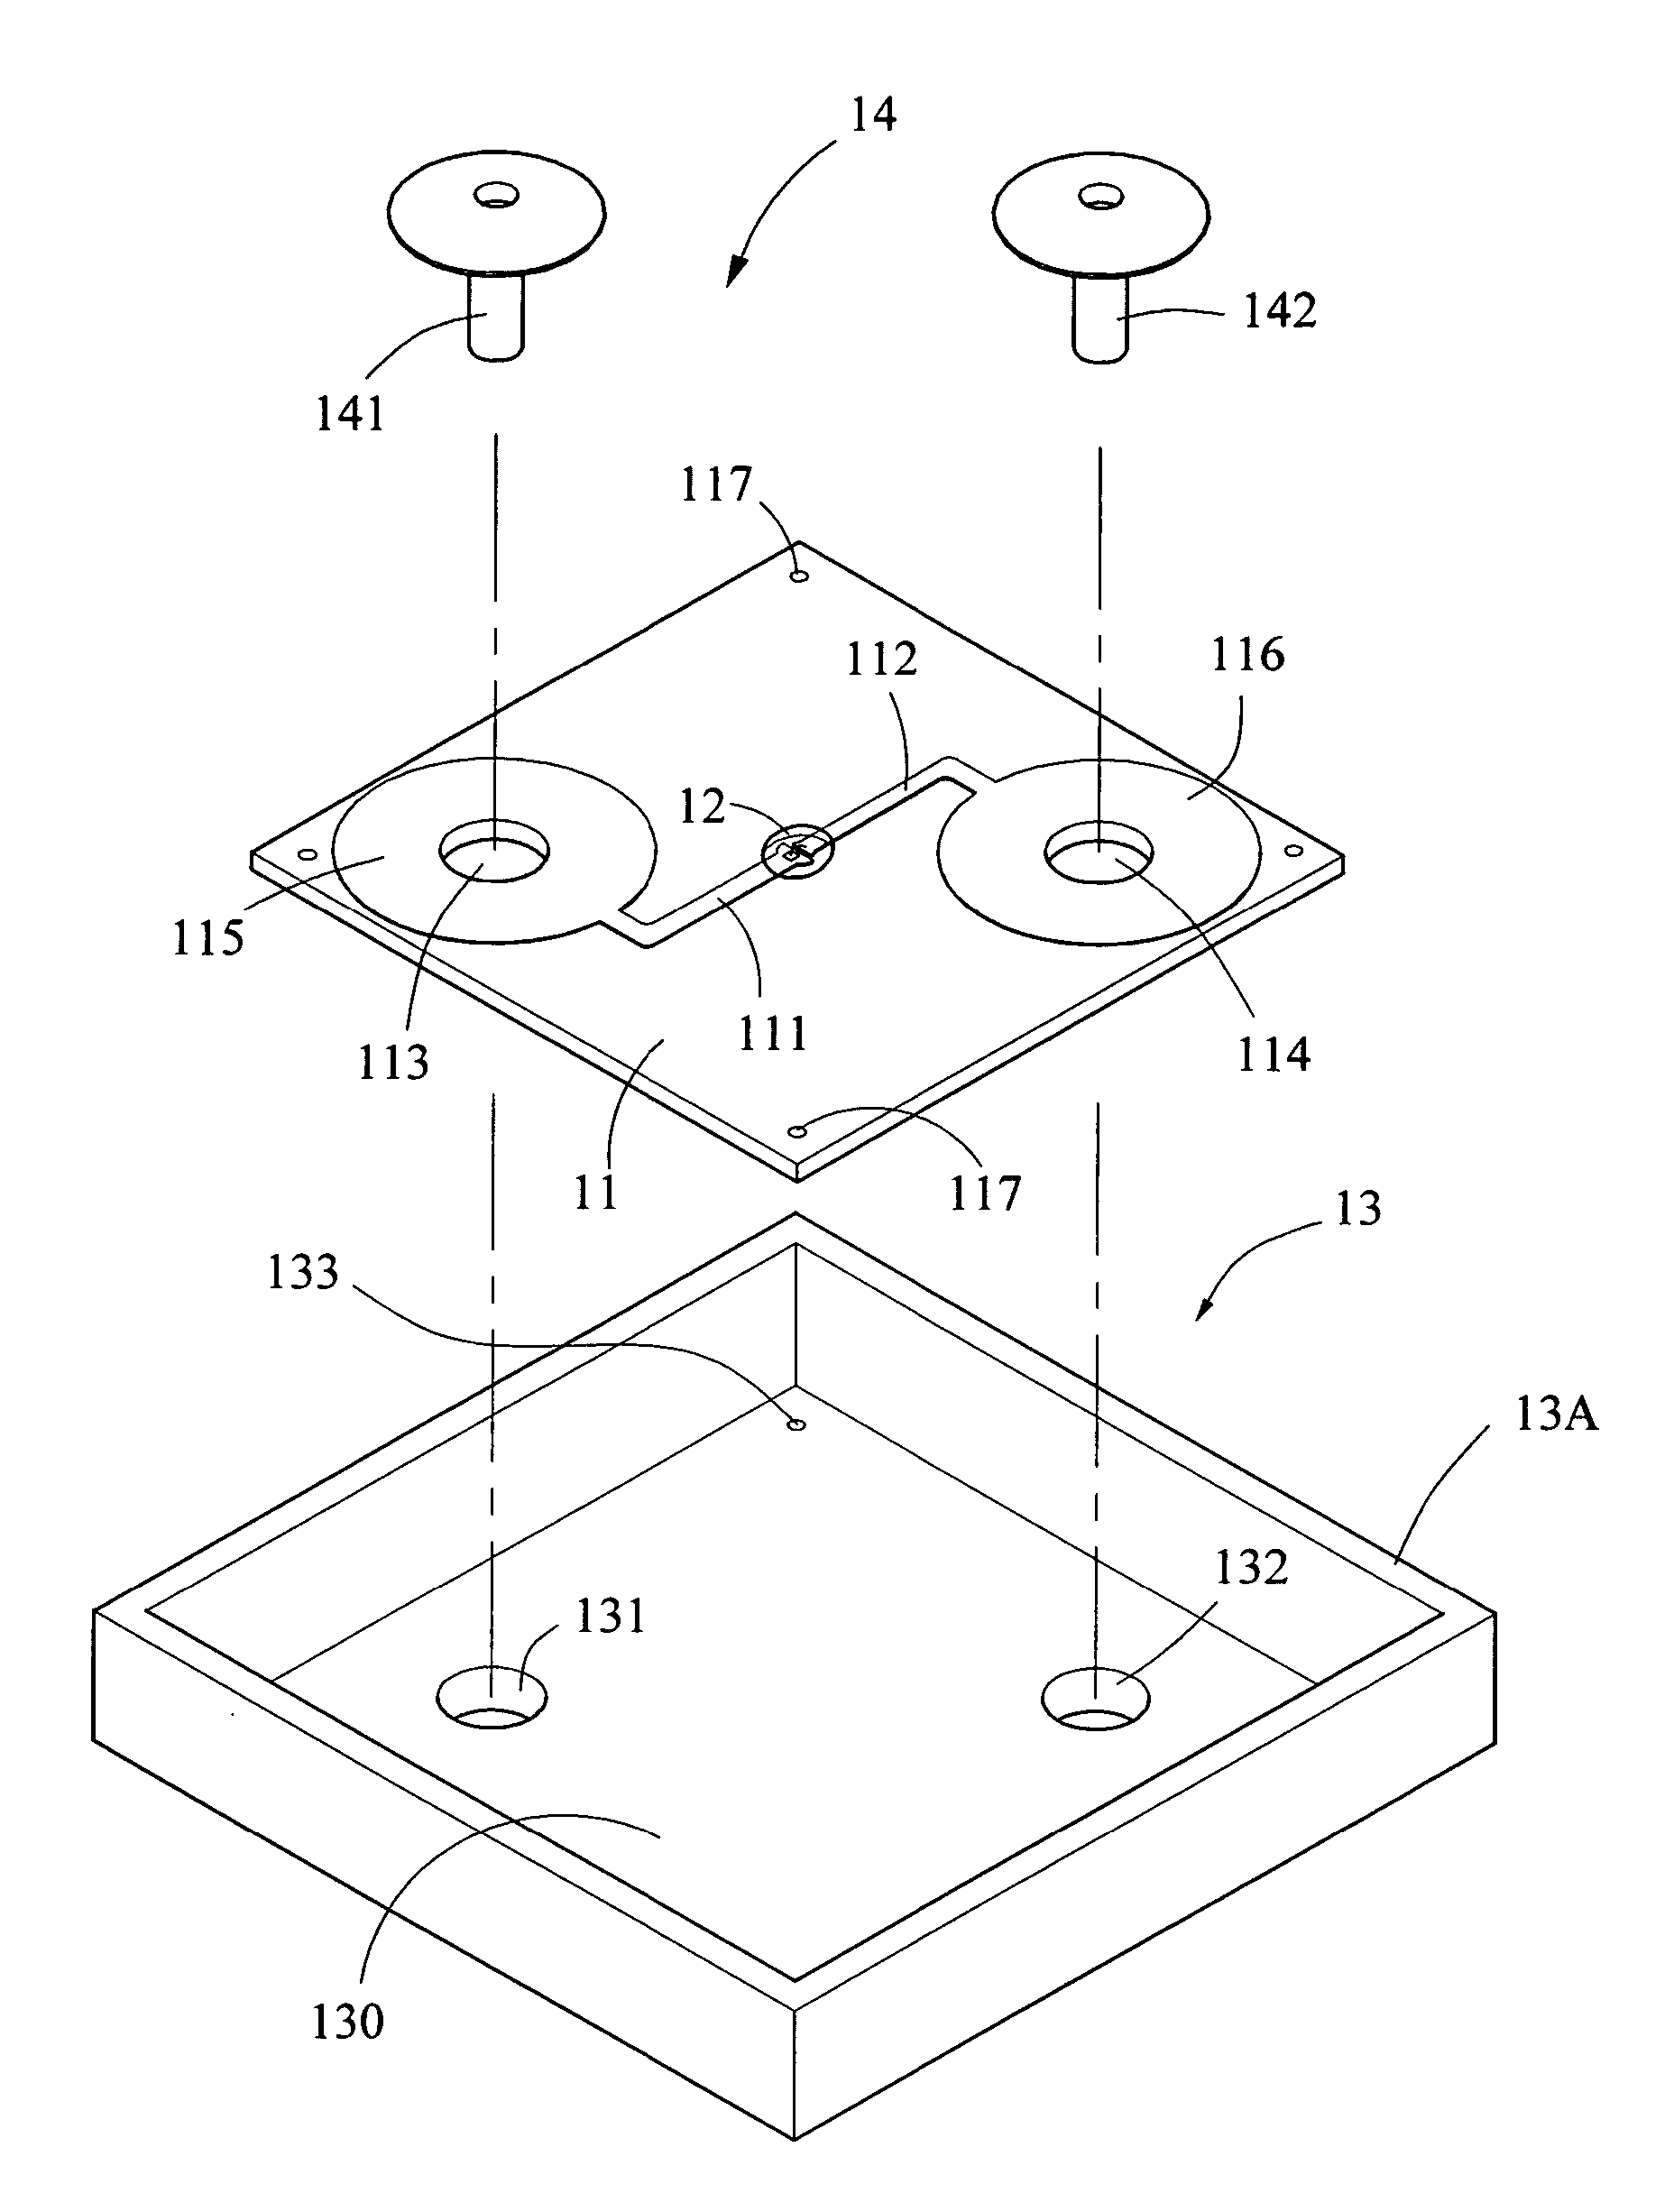 Reflector device and method of manufacturing same